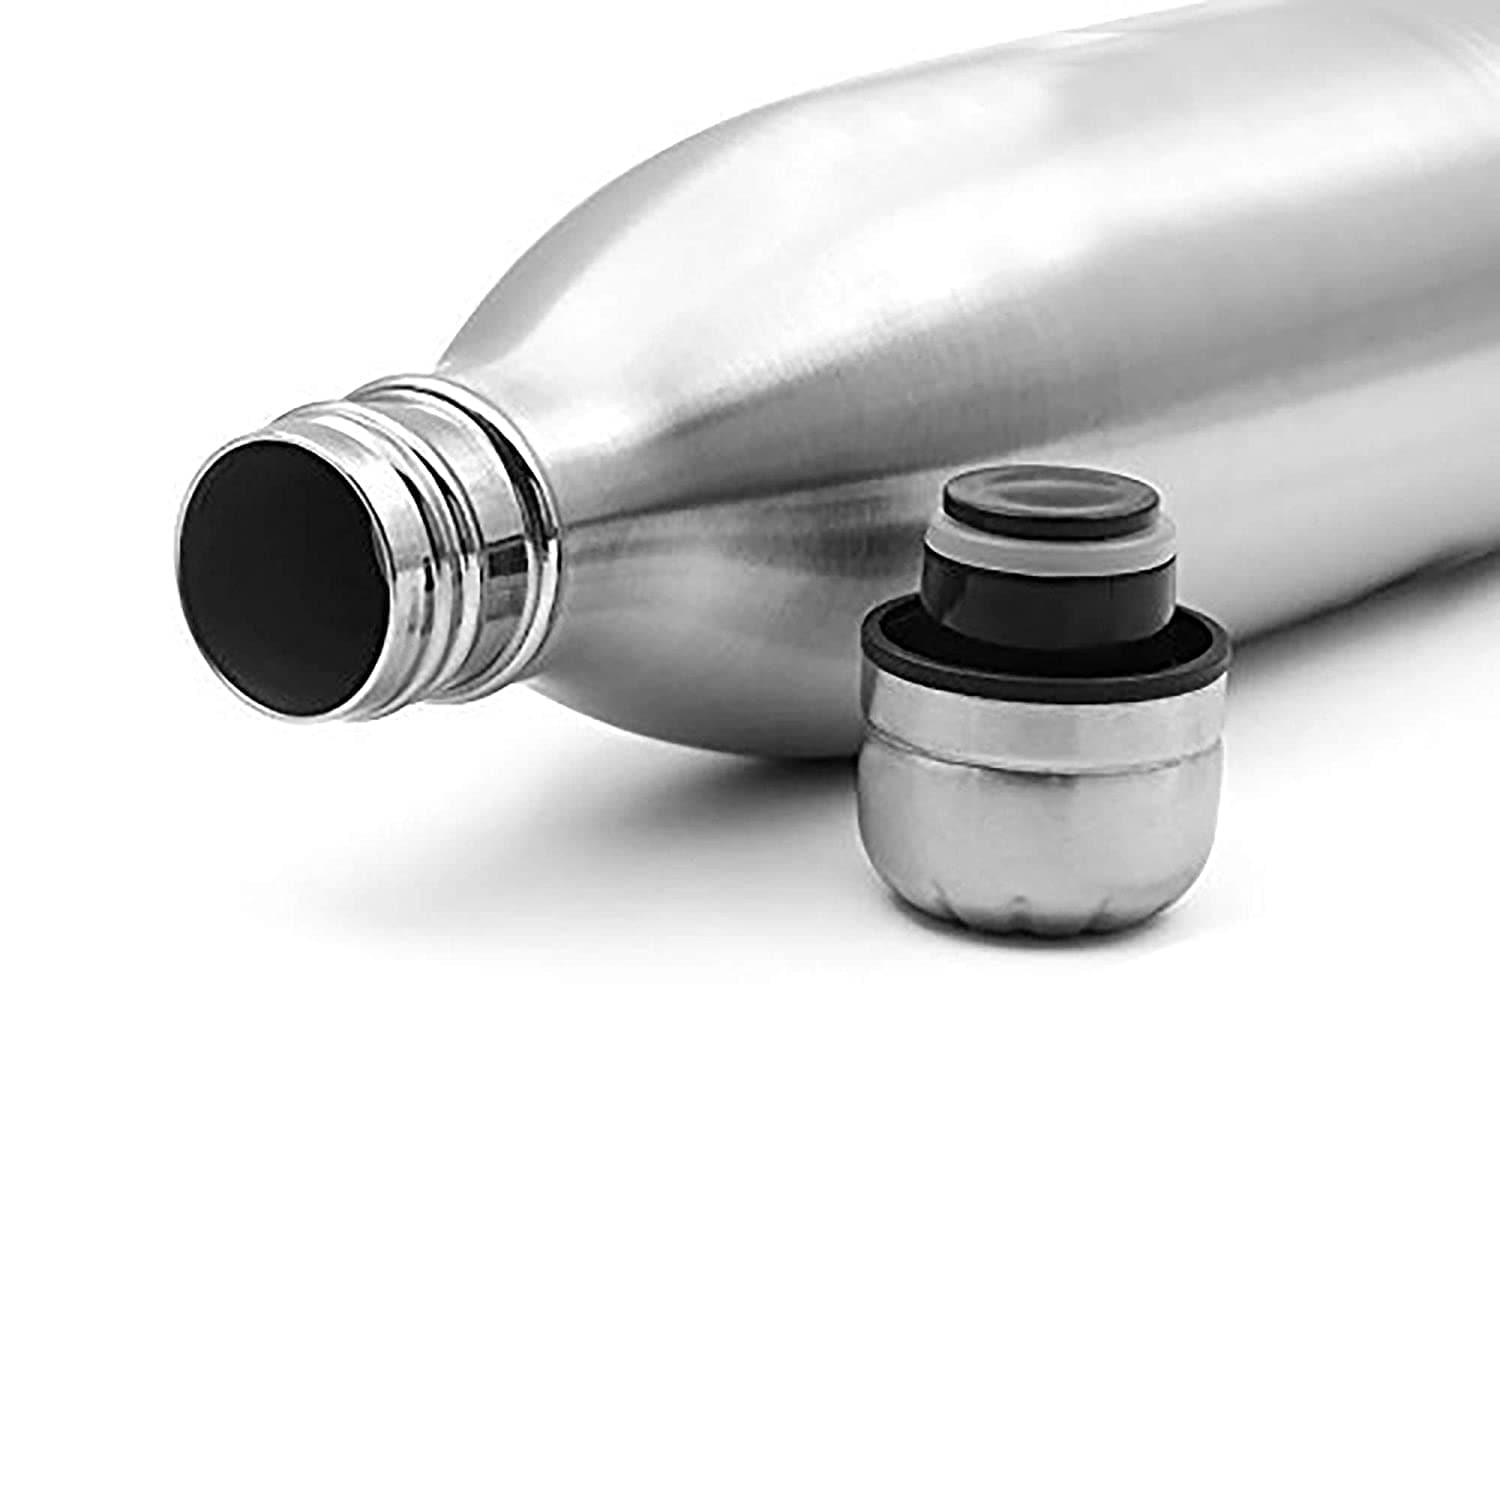 Milton Thermosteel Vacuum Insulated Bottle - Silver/Black - 350 ml